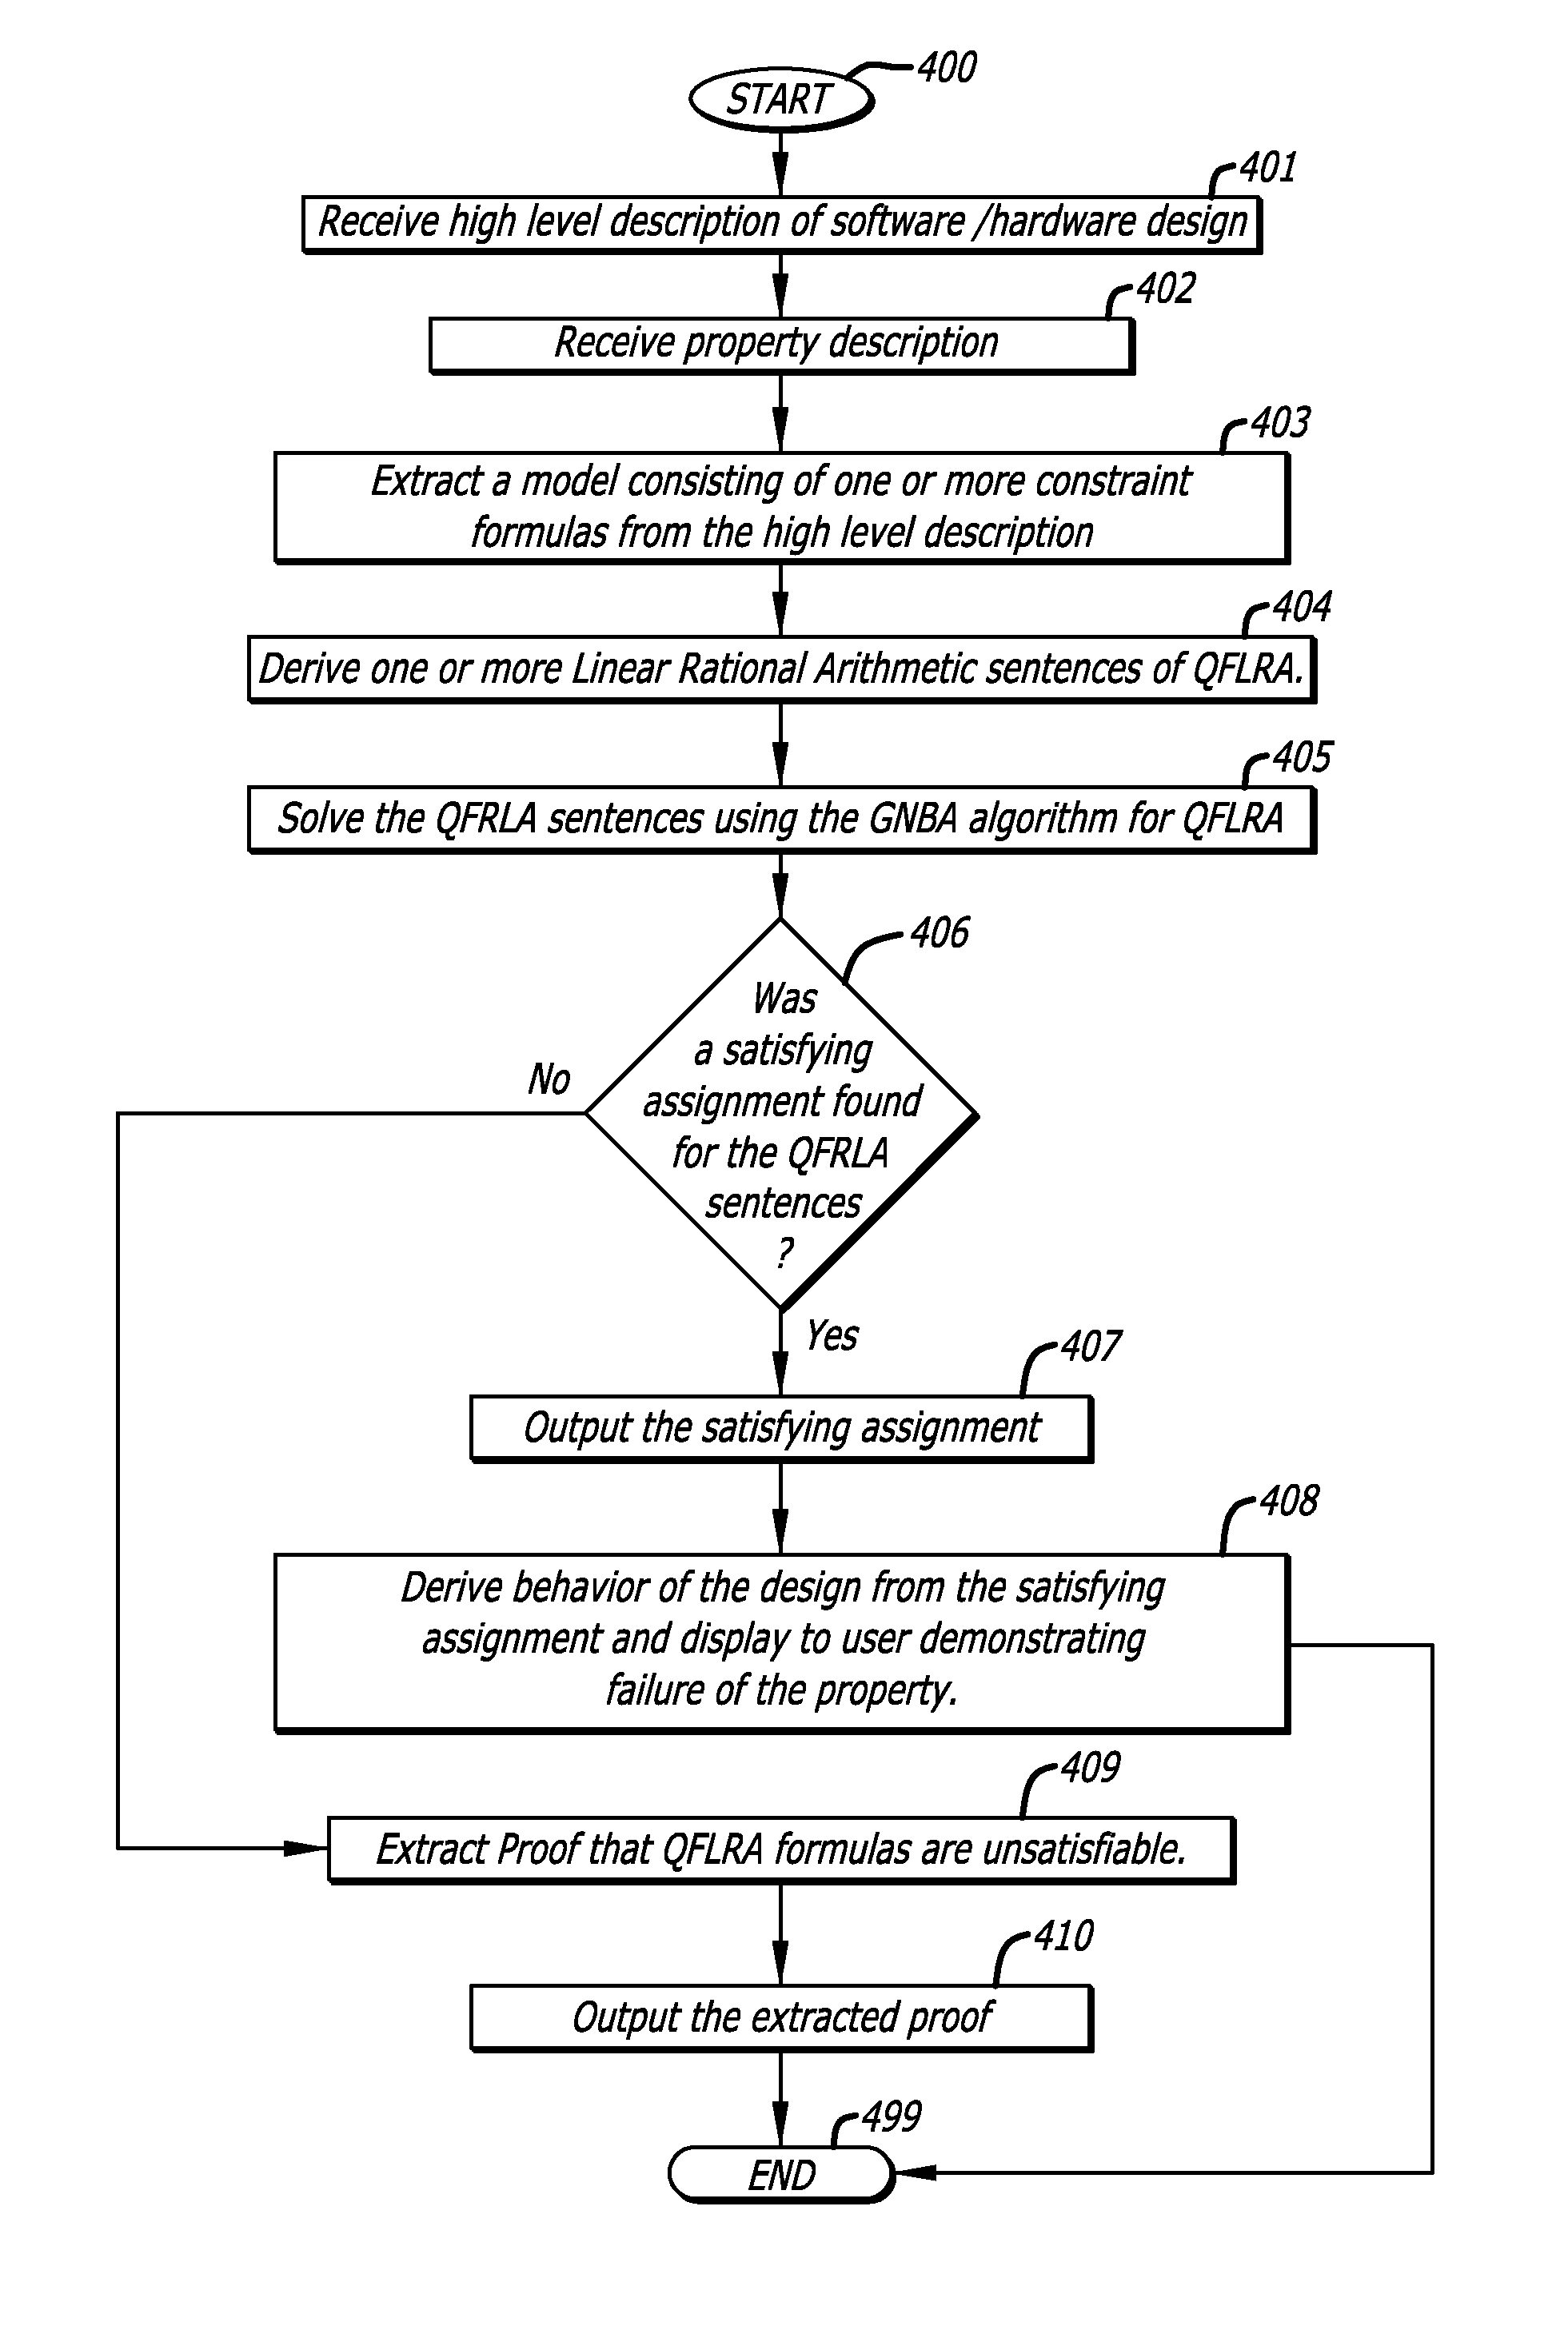 Apparatus with general numeric backtracking algorithm for solving satisfiability problems to verify functionality of circuits and software